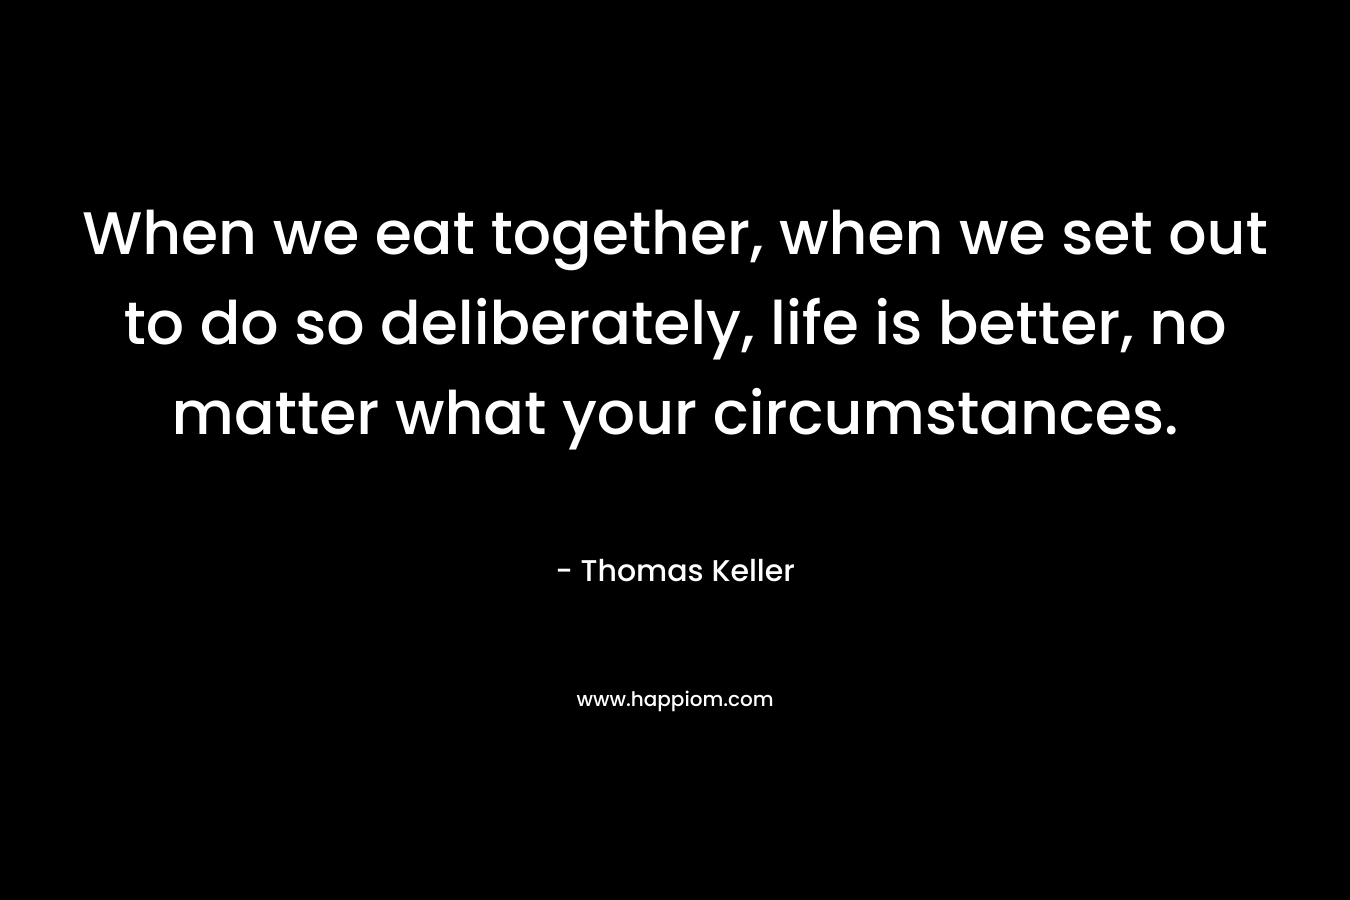 When we eat together, when we set out to do so deliberately, life is better, no matter what your circumstances.